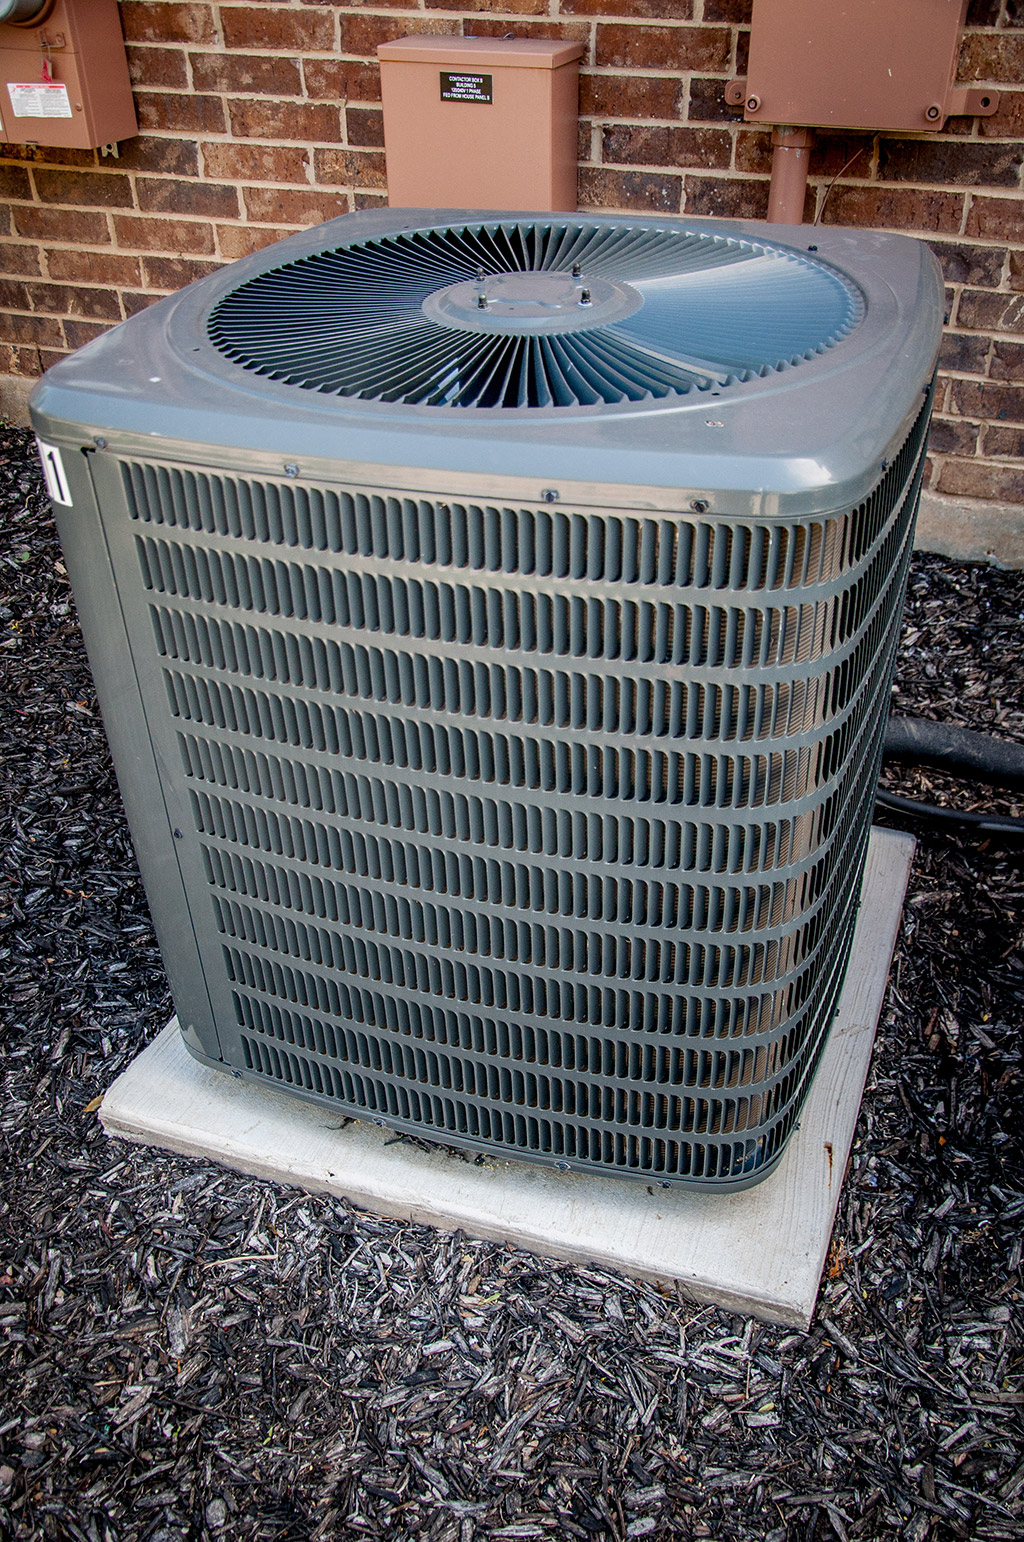 Heating and Air Conditioning Repair in Allen, TX: Only Let the Experts Take Care of the Job